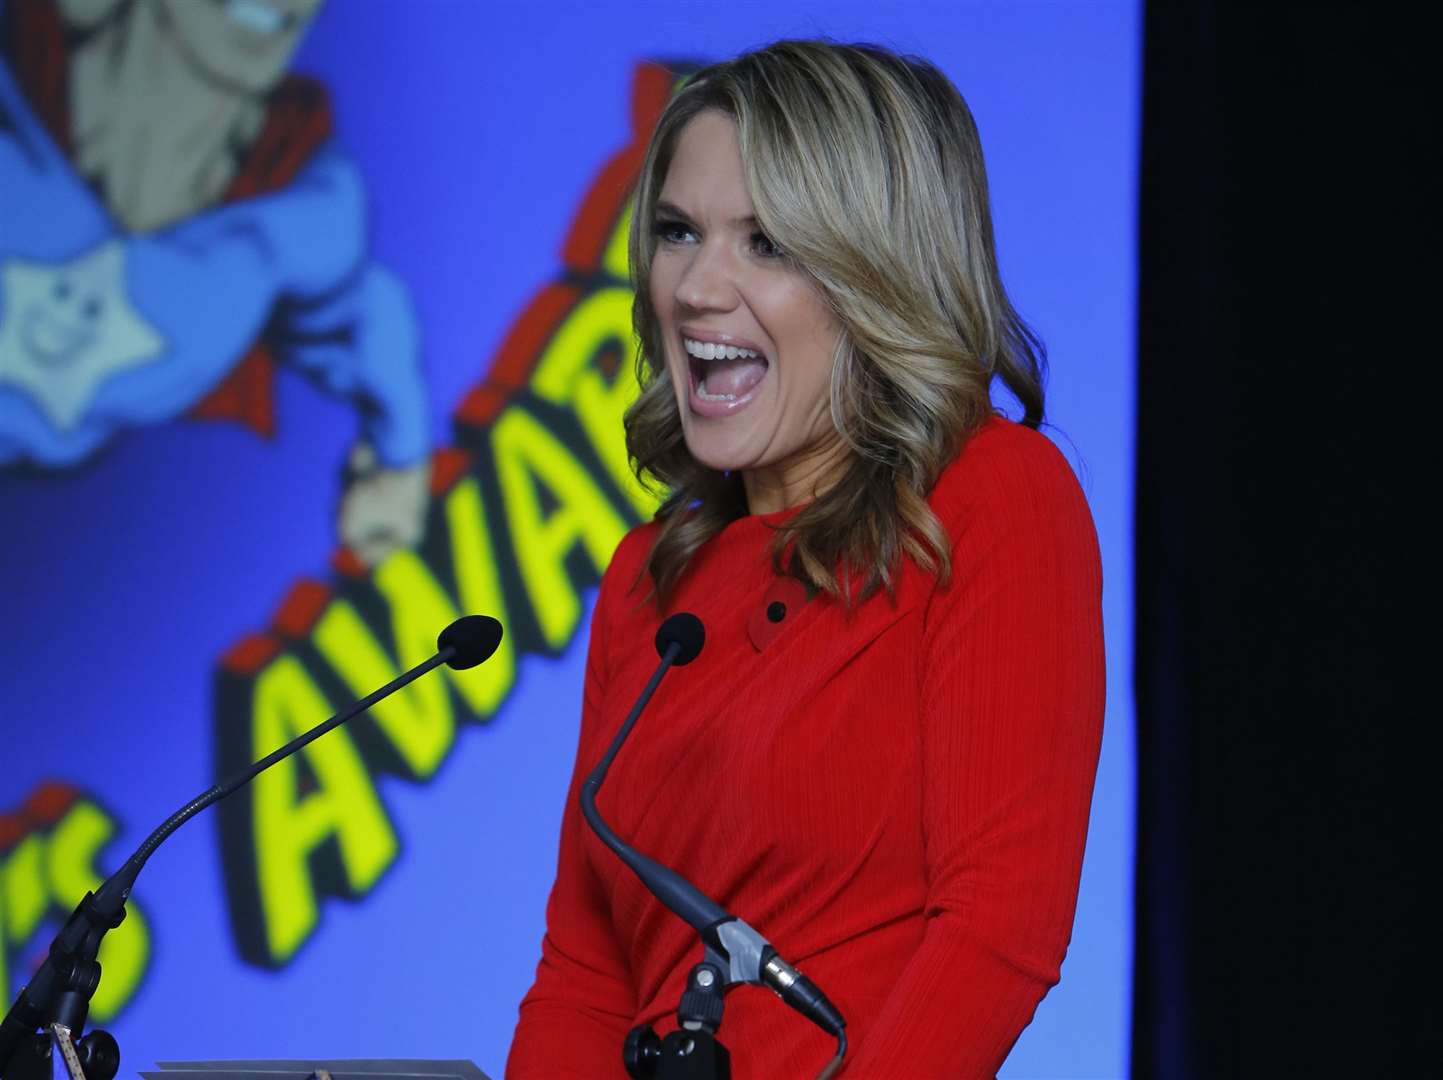 Charlotte Hawkins from Good Morning Britain will present the event